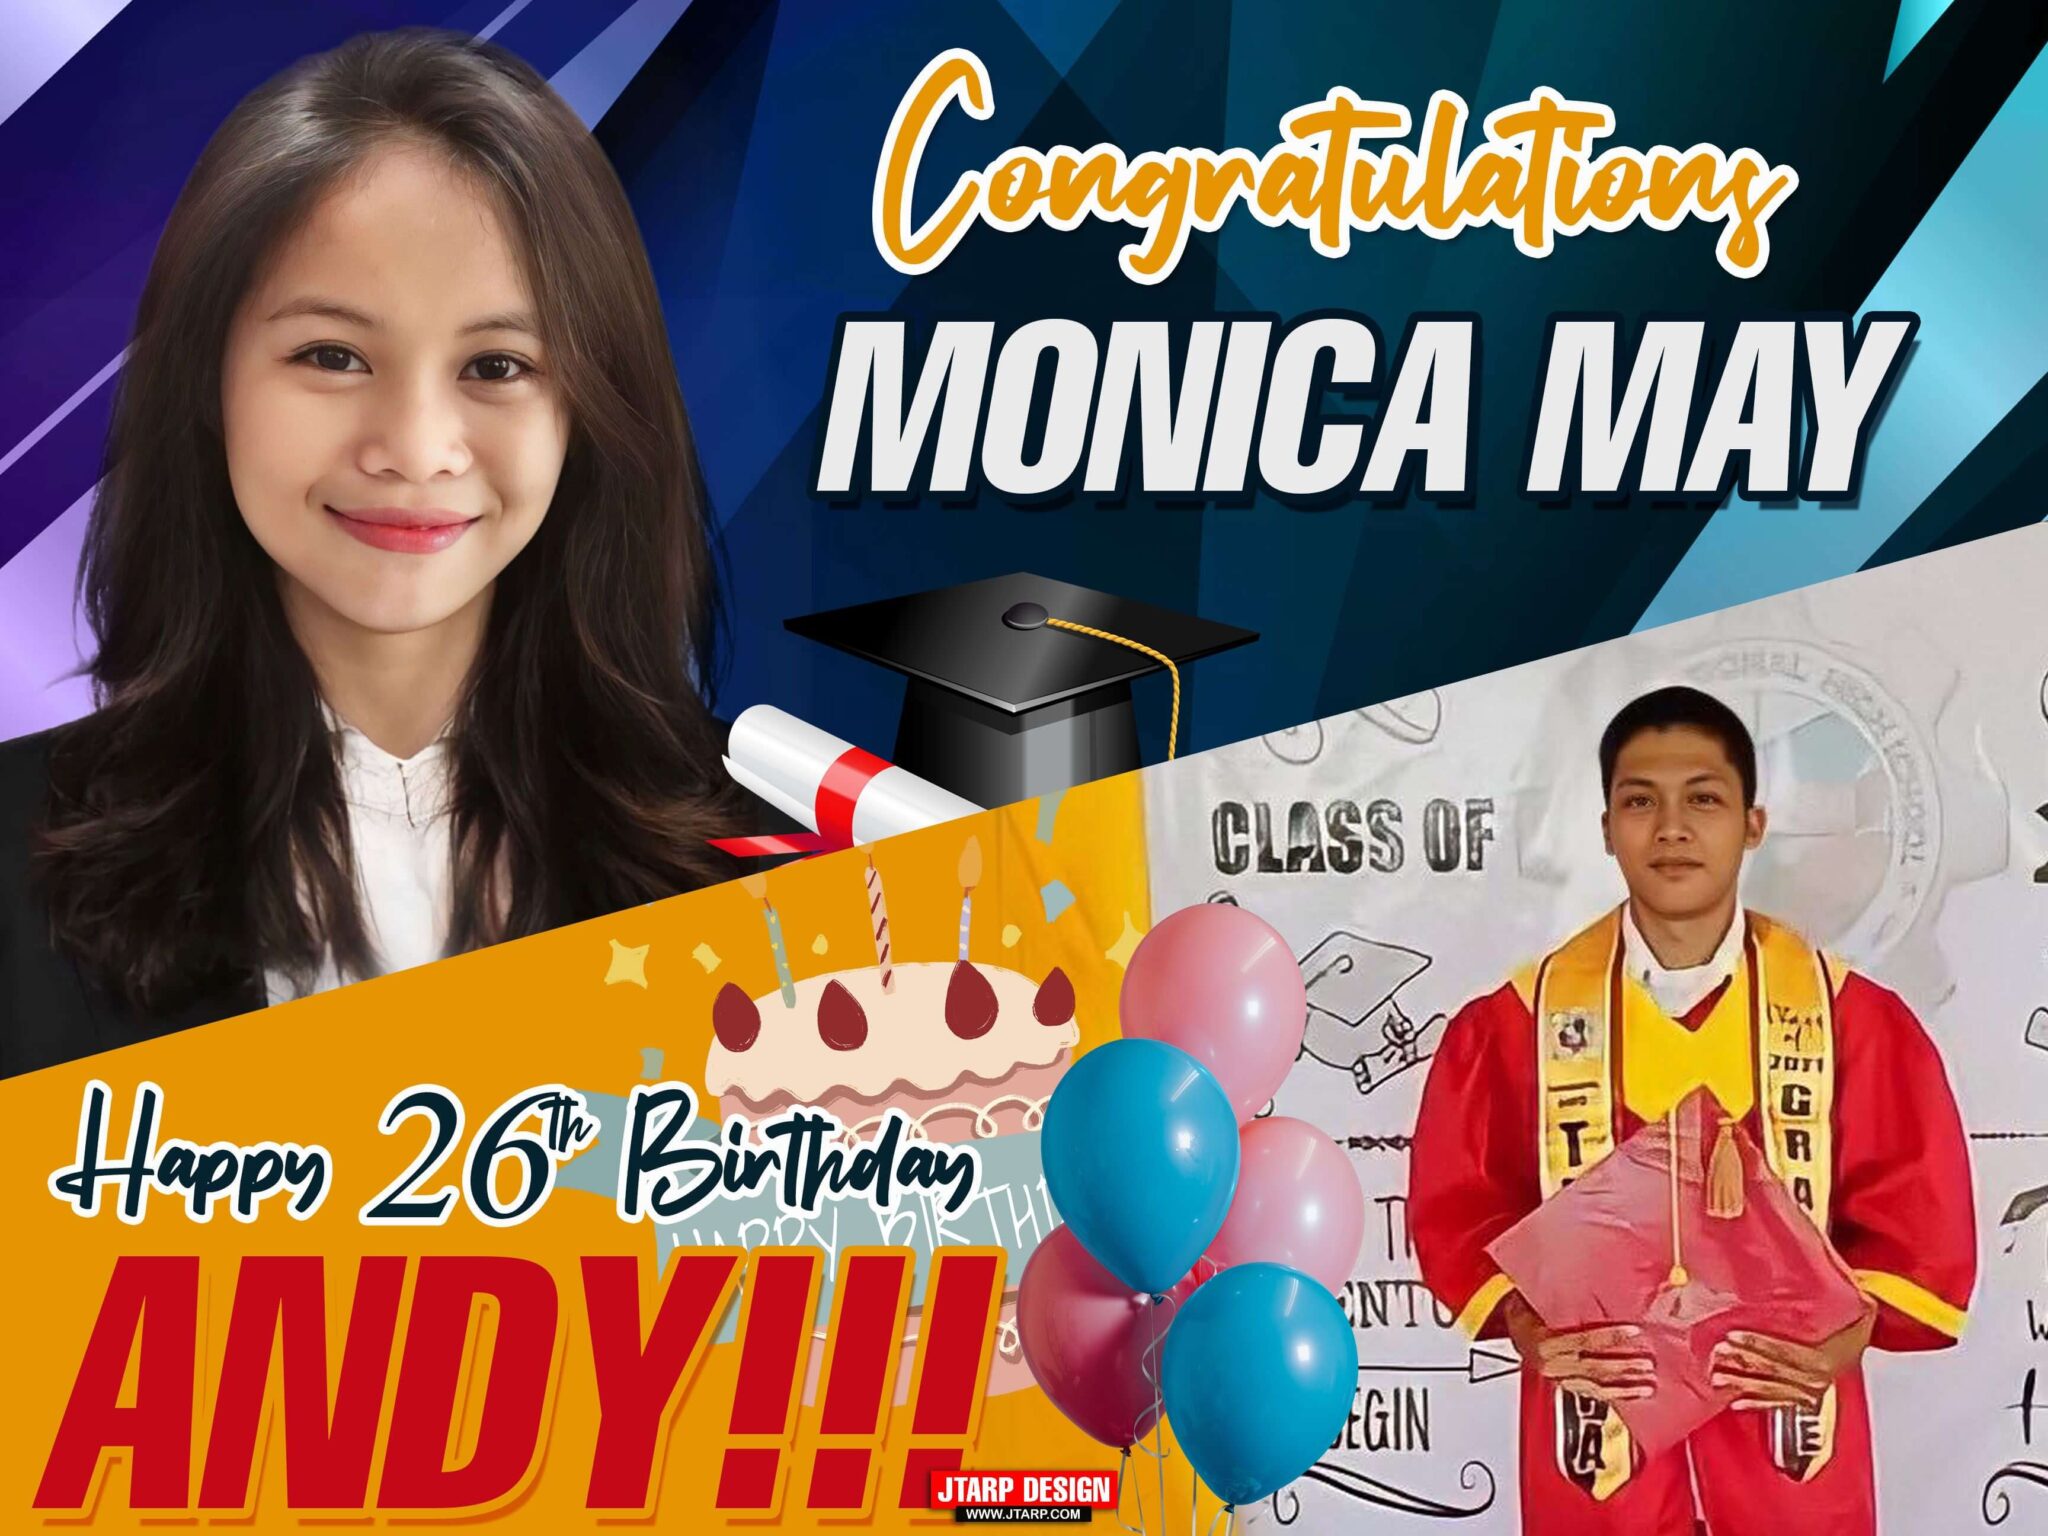 Congratulations and Happy Birthday Monica and Andy